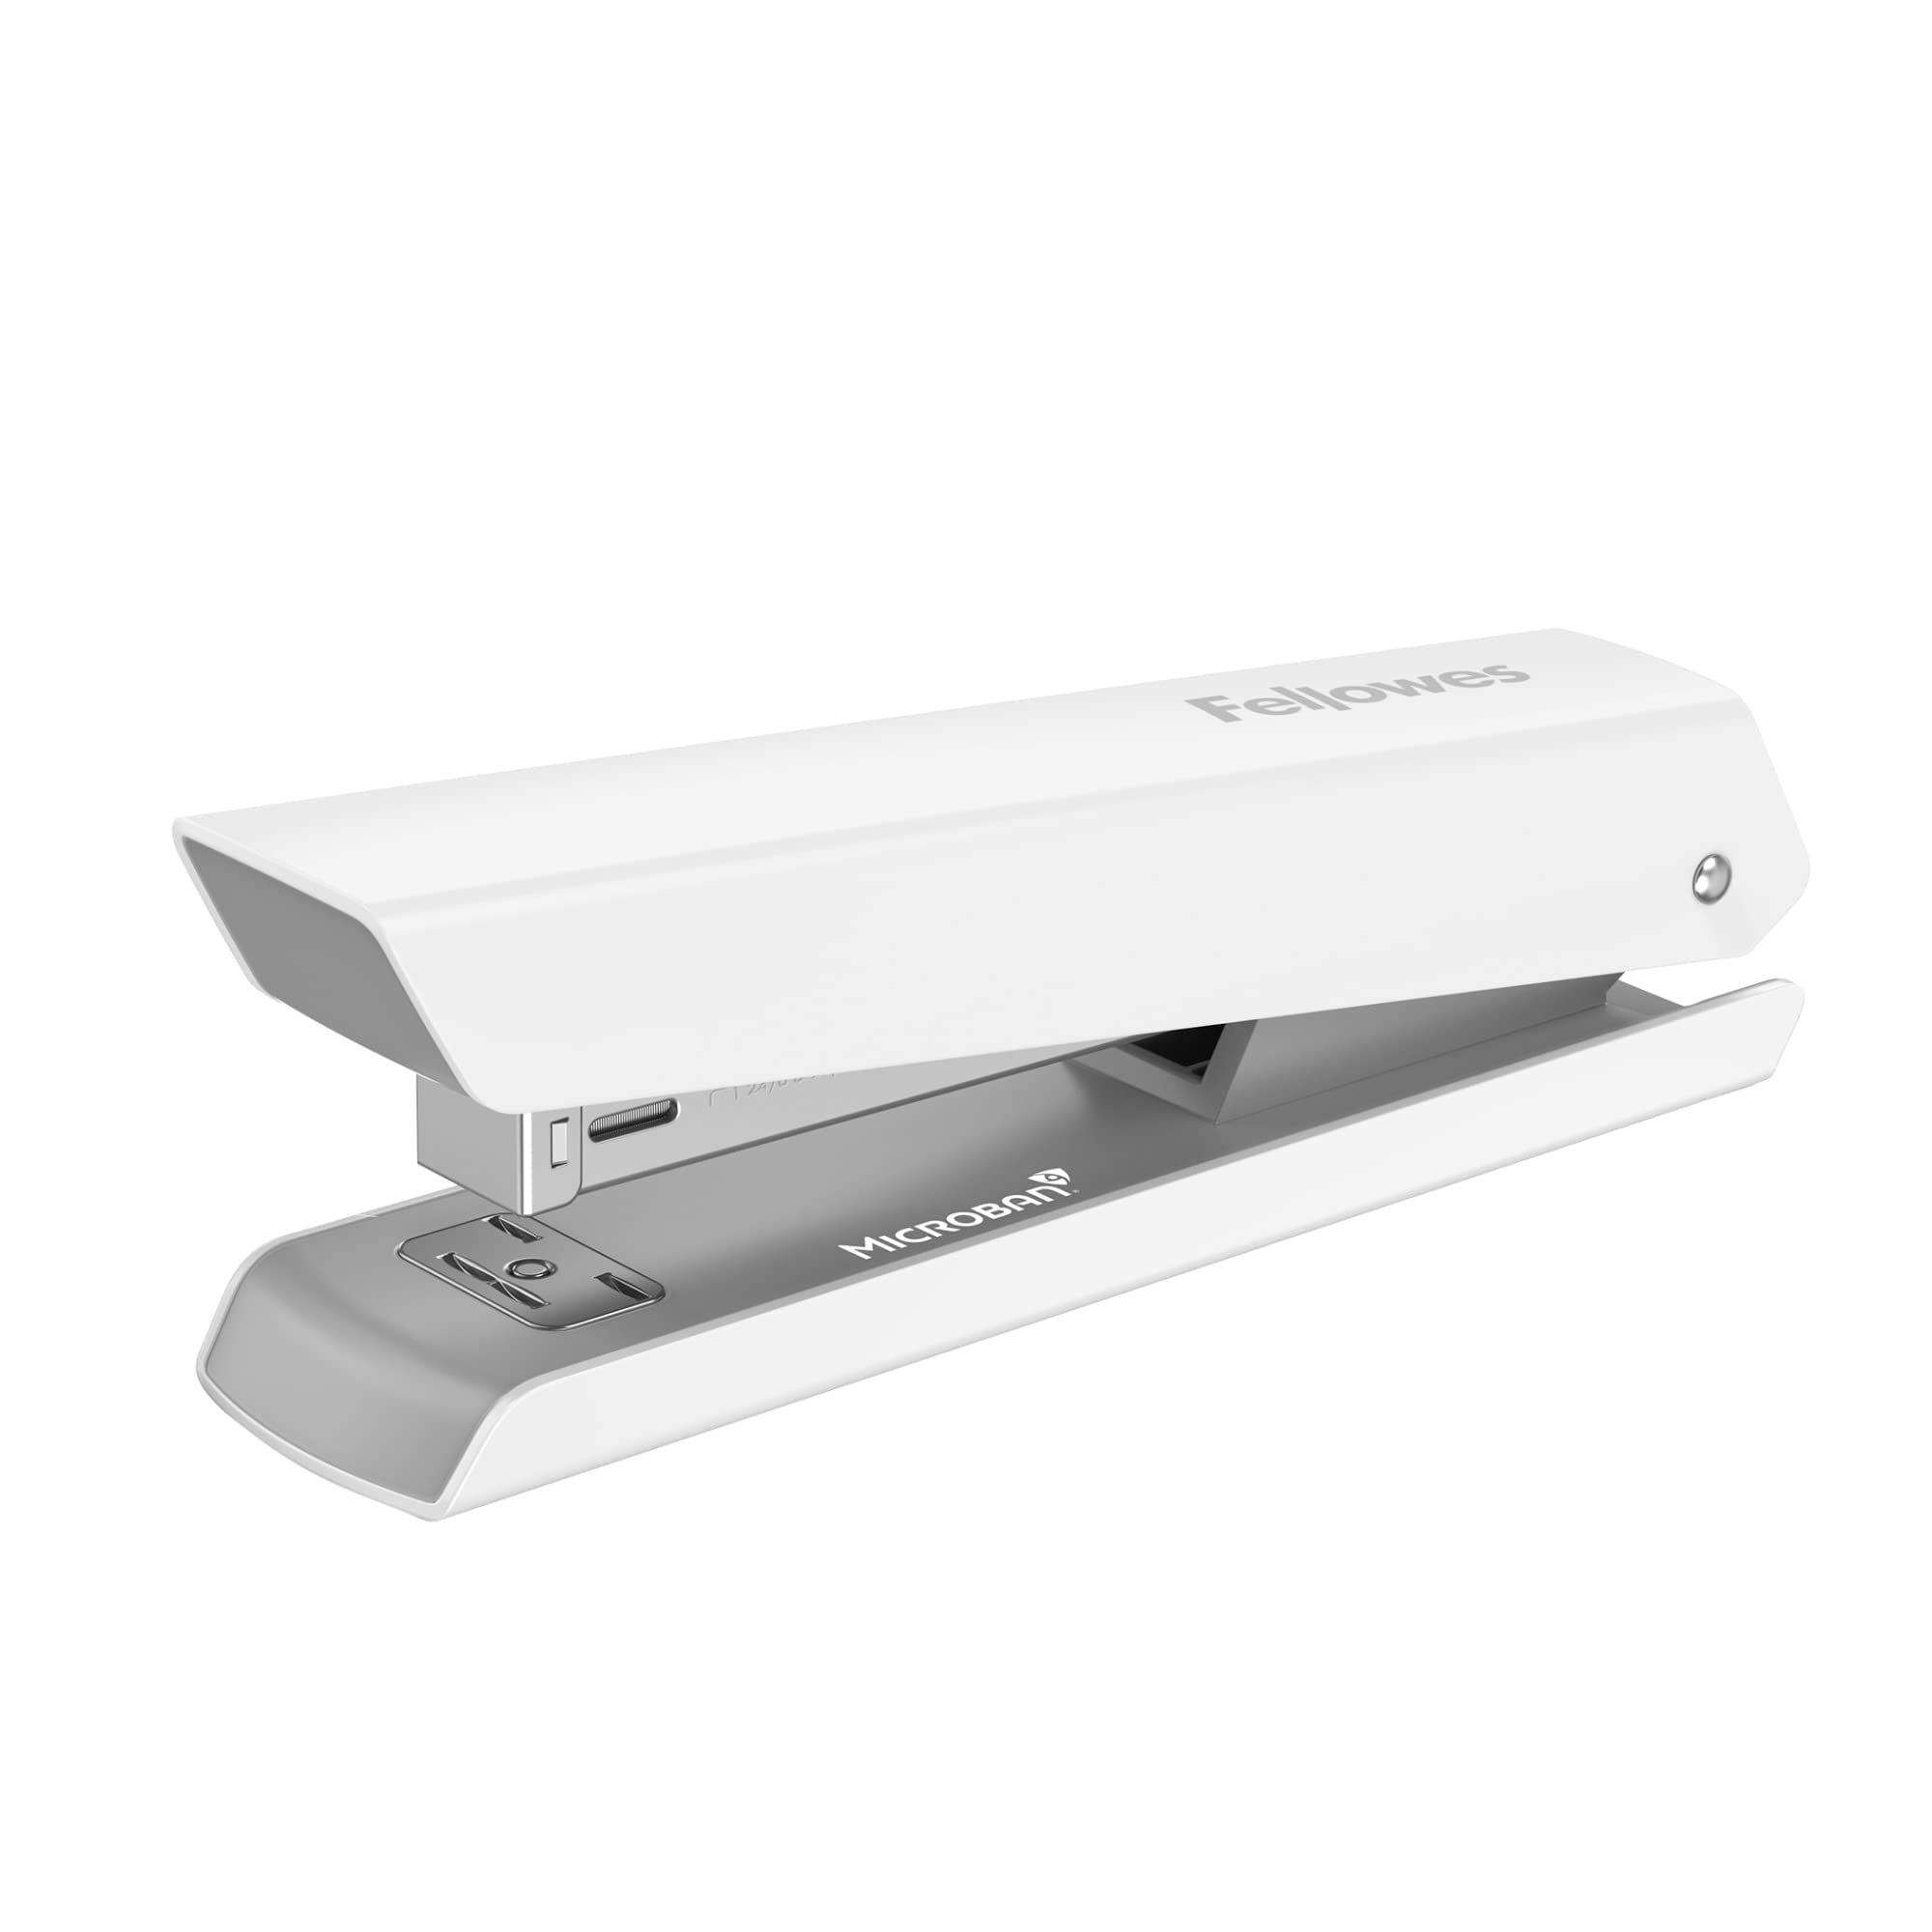 Fellowes LX820 Classic Desktop and Office Stapler for Classroom, Home and Work, Holds Full Strip of Staples, 20 Sheet Capacity, White